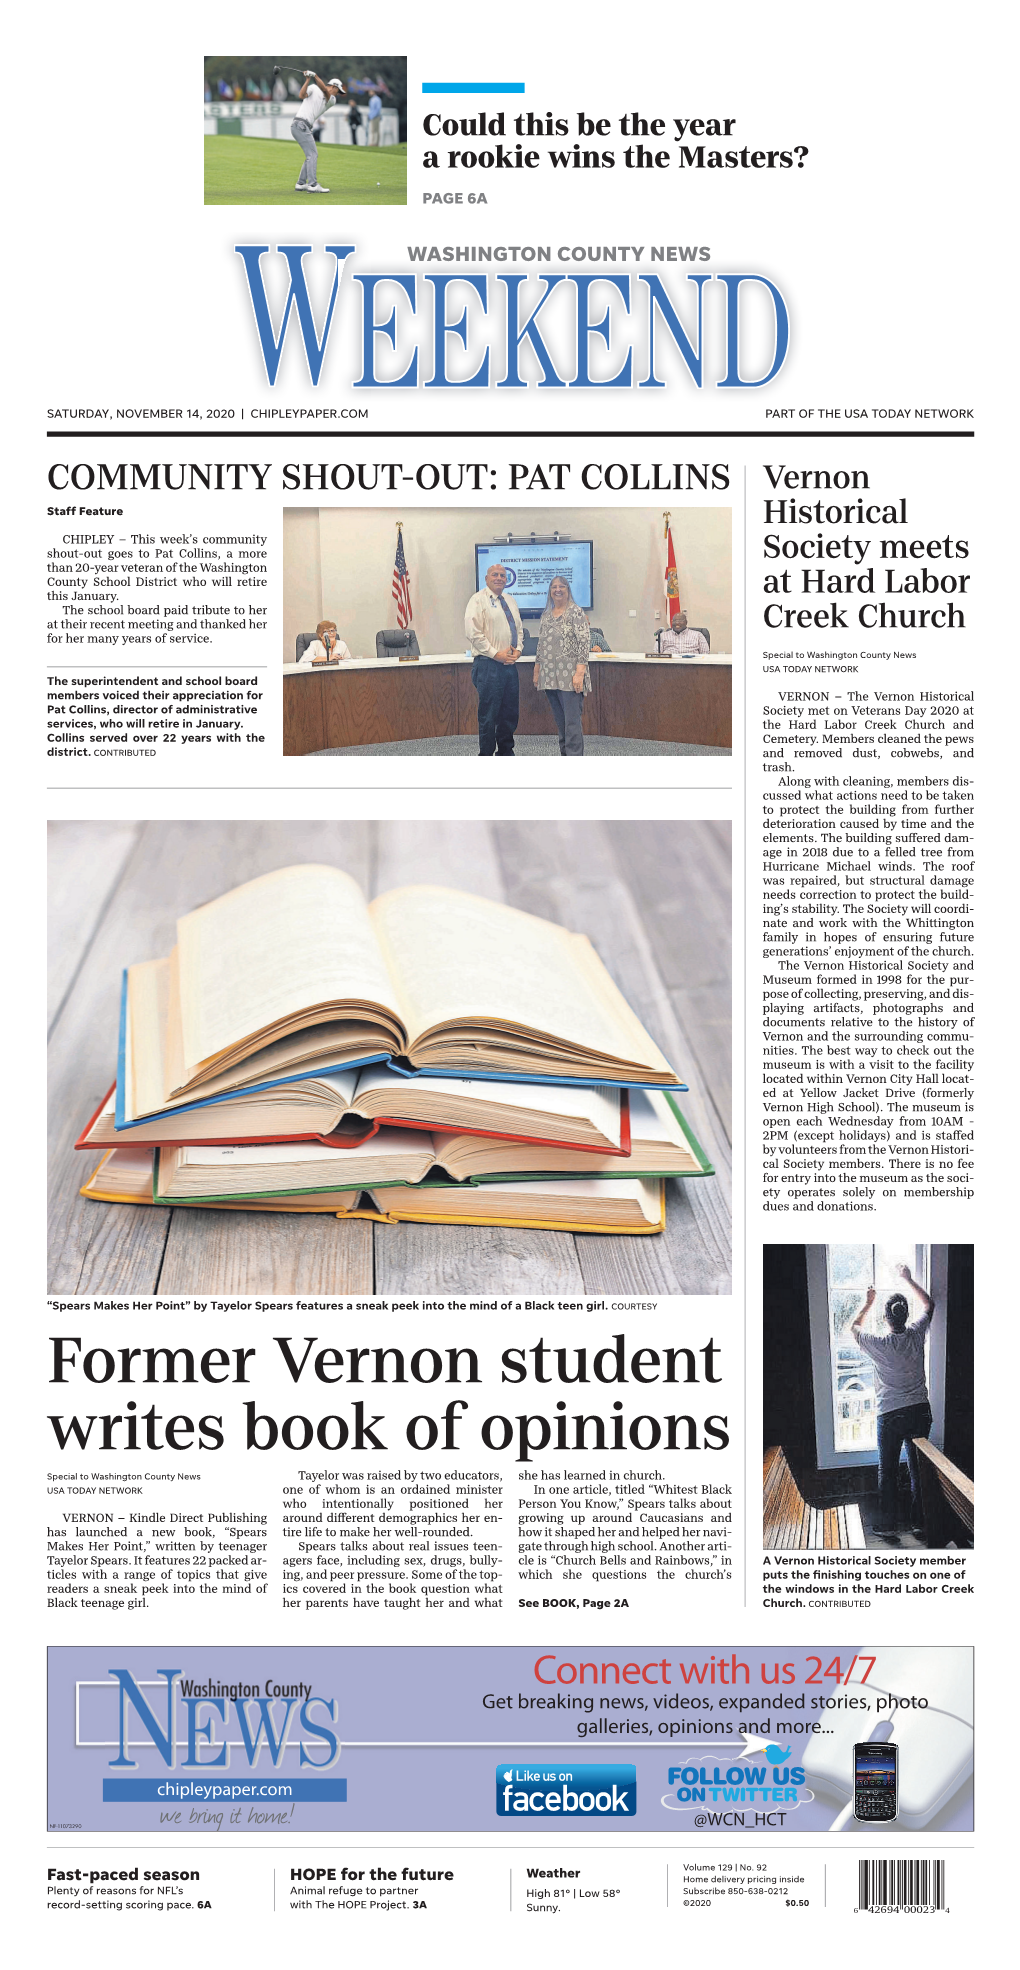 Former Vernon Student Writes Book of Opinions Special to Washington County News Tayelor Was Raised by Two Educators, She Has Learned in Church